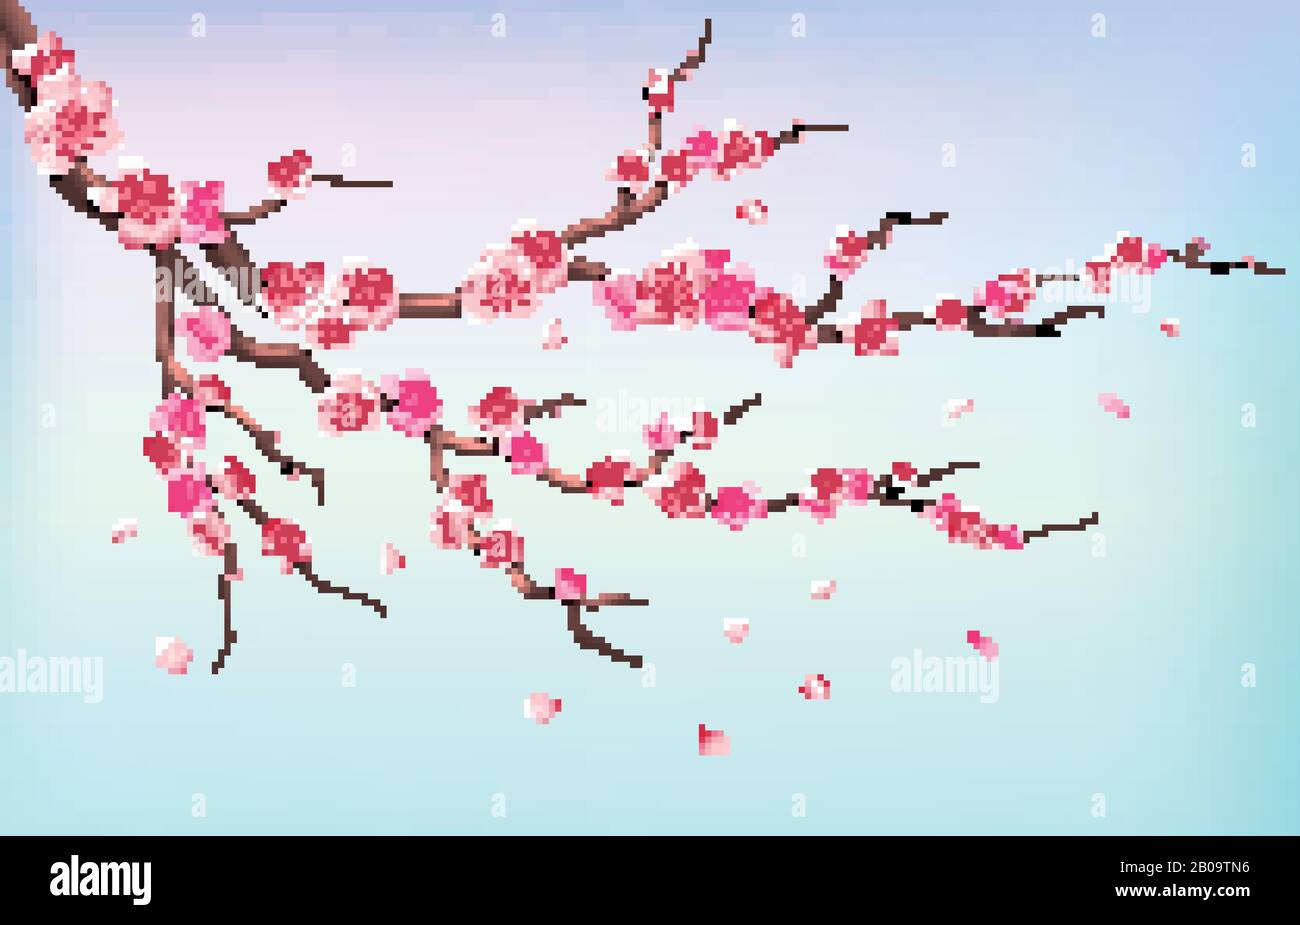 Japan sakura branches with cherry blossom flowers and falling petals isolated on white background vector illustration. Branch of cherry blossoms on blue background Stock Vector